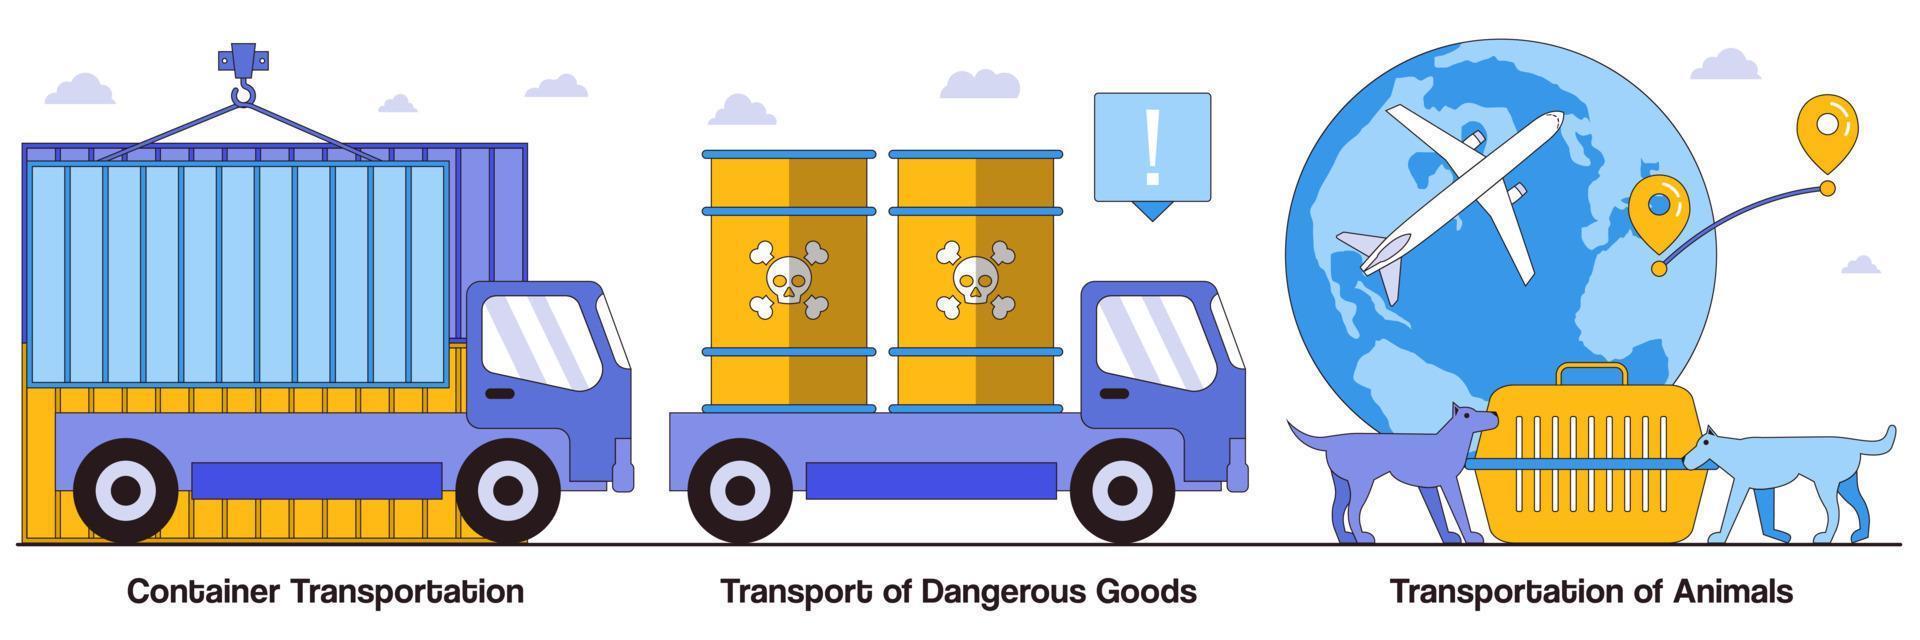 Container Transportation, Transport of Dangerous Goods, Transportation of Animals with People Characters Illustrations Pack vector